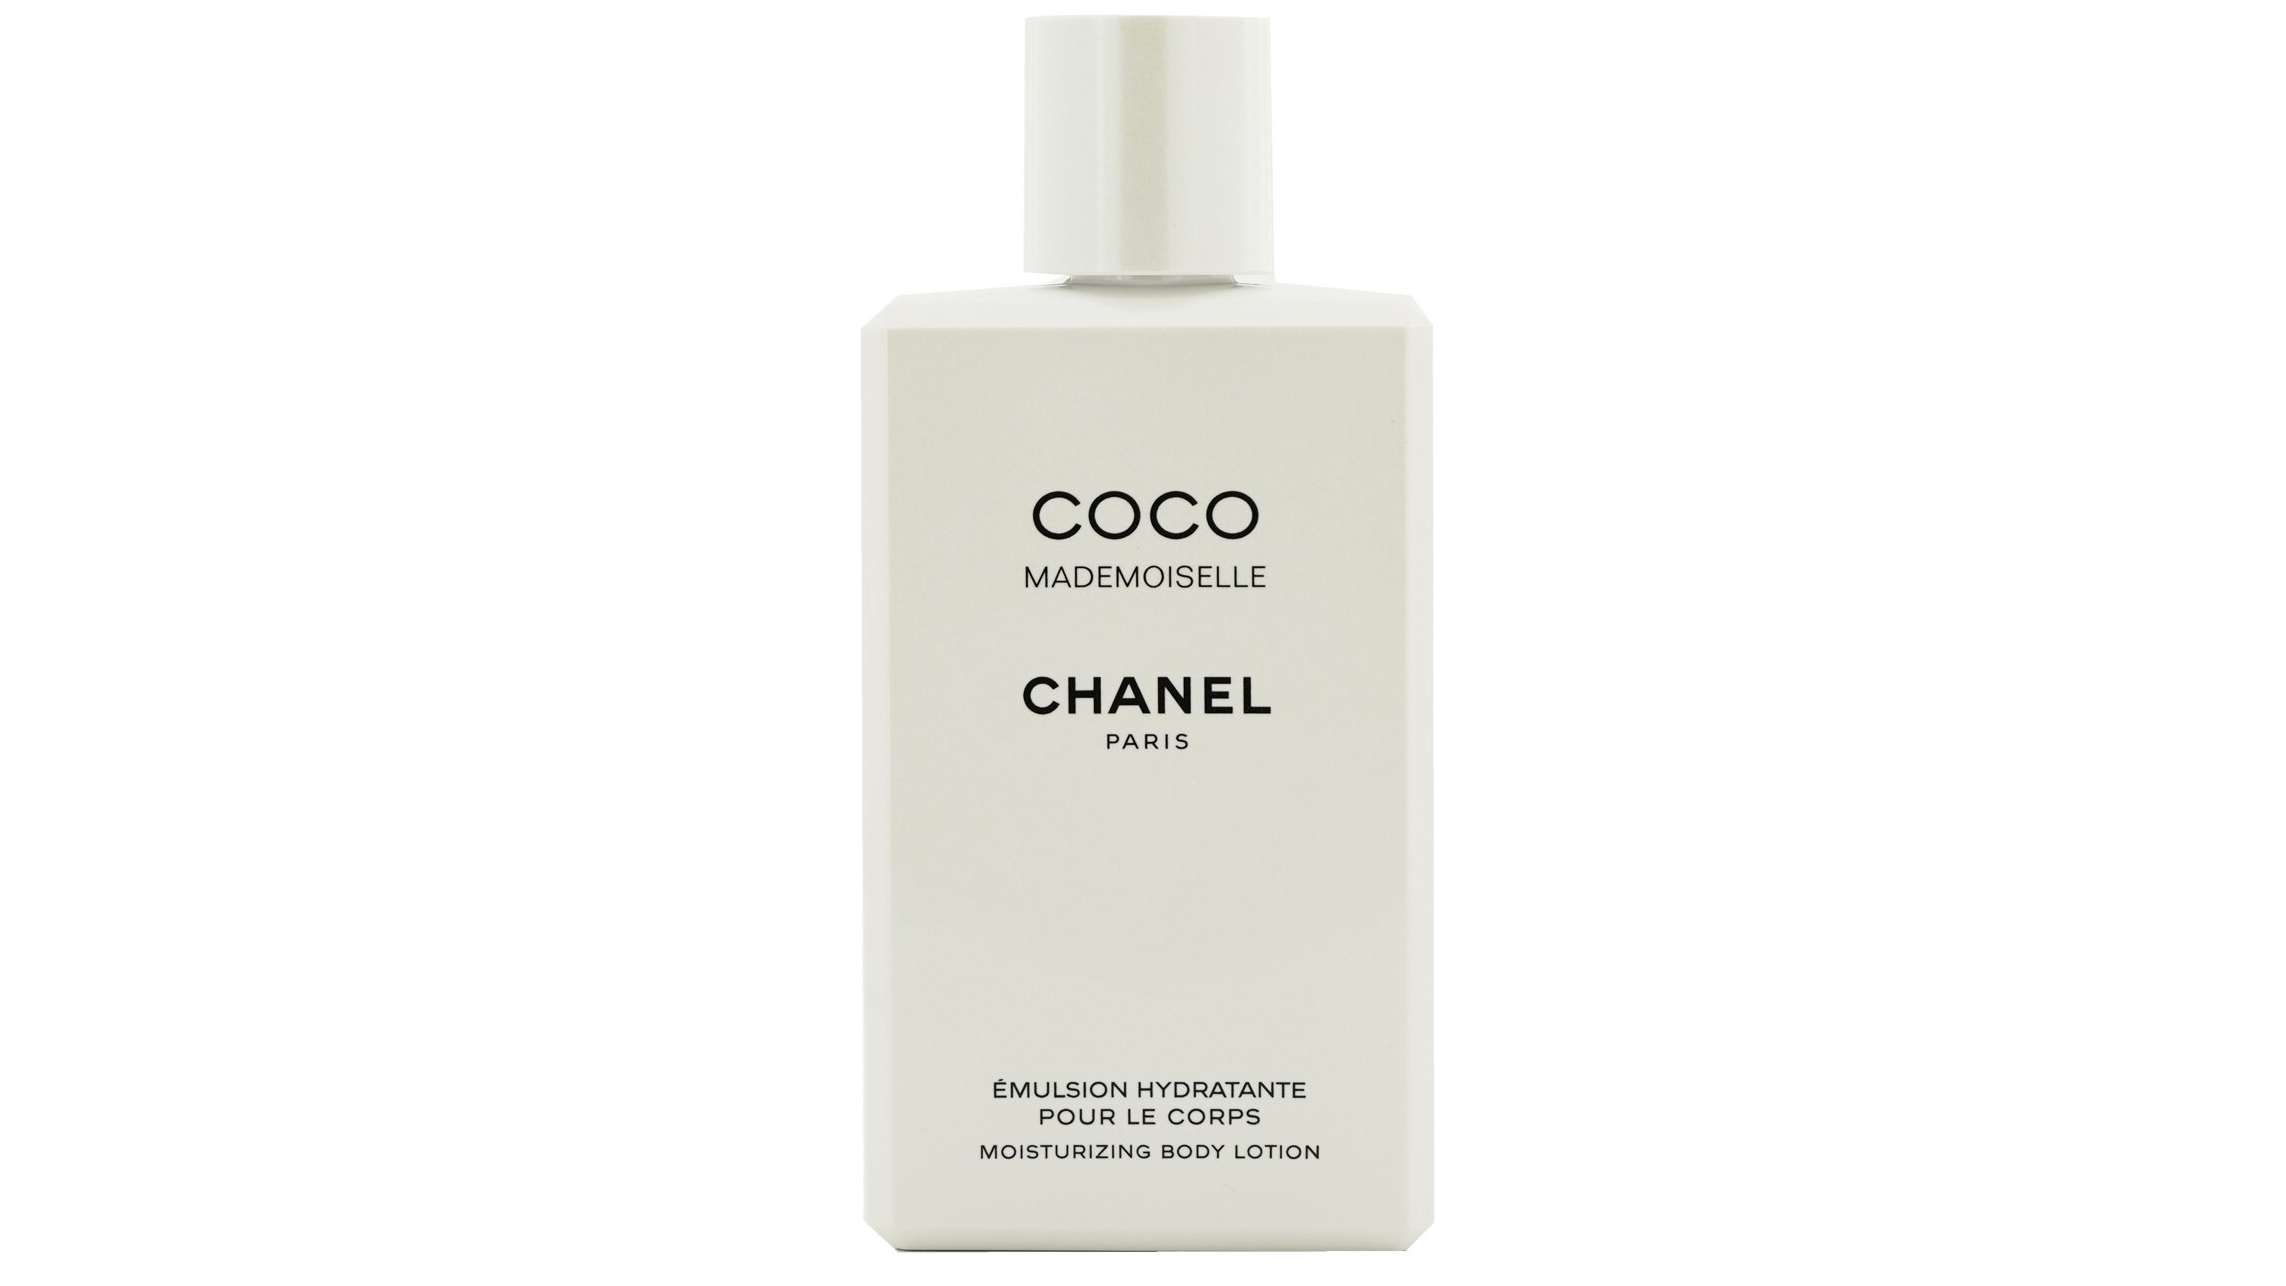 CHANEL COCO NOIR Body Lotion 6.8oz / 200ml *Authentic *Factory Sealed New  in Box